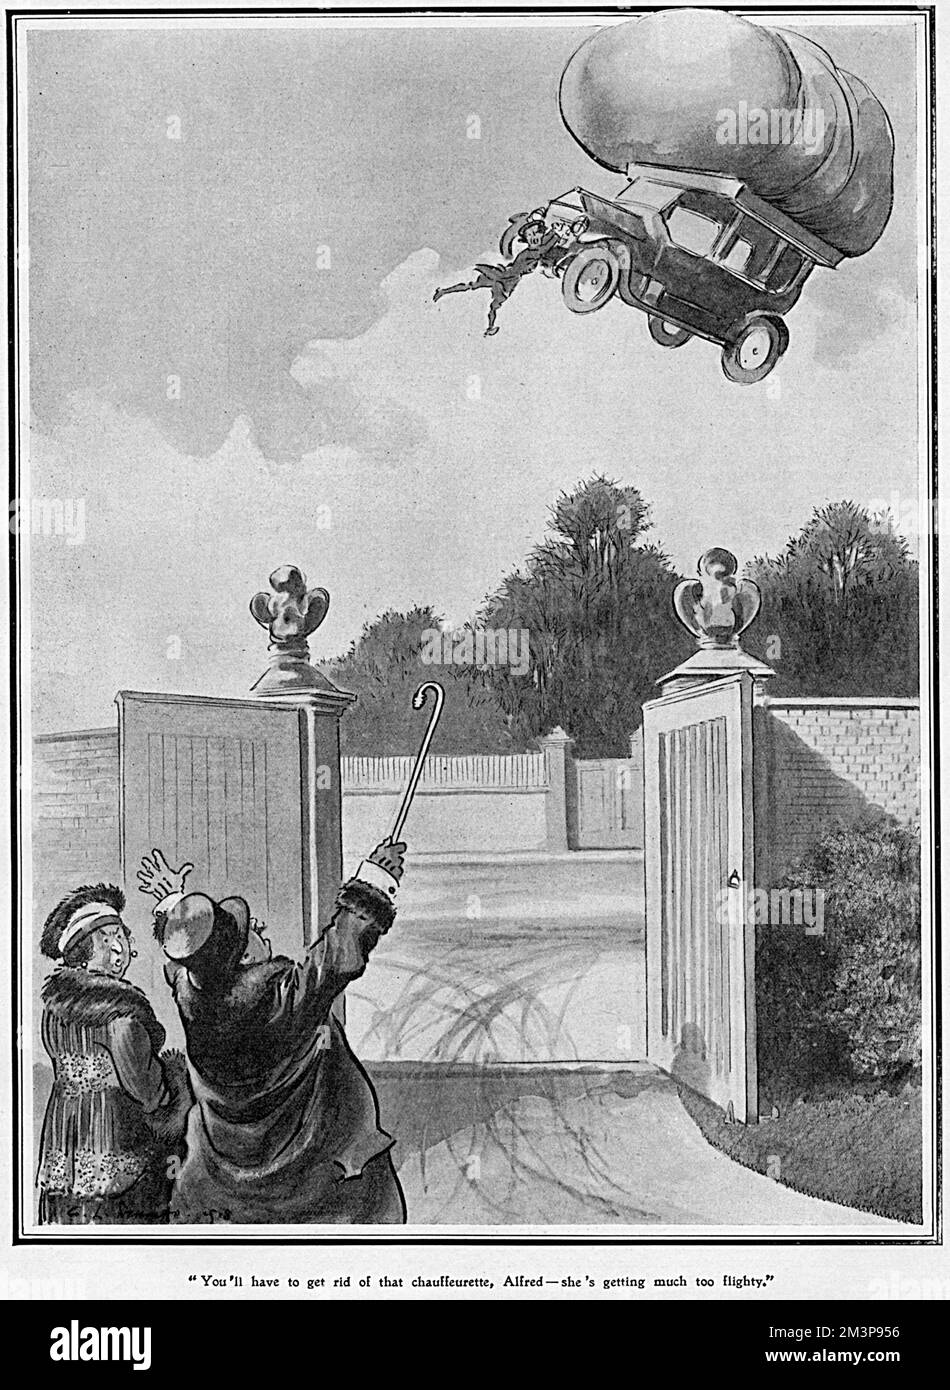 &quot;You'll have to get rid of the chauffeurette, Alfred - she's getting much too flighty.&quot;  Cartoon commenting on the double novelty of gas powered cars and female chauffeurs during the First World War period.       Date: 1918 Stock Photo